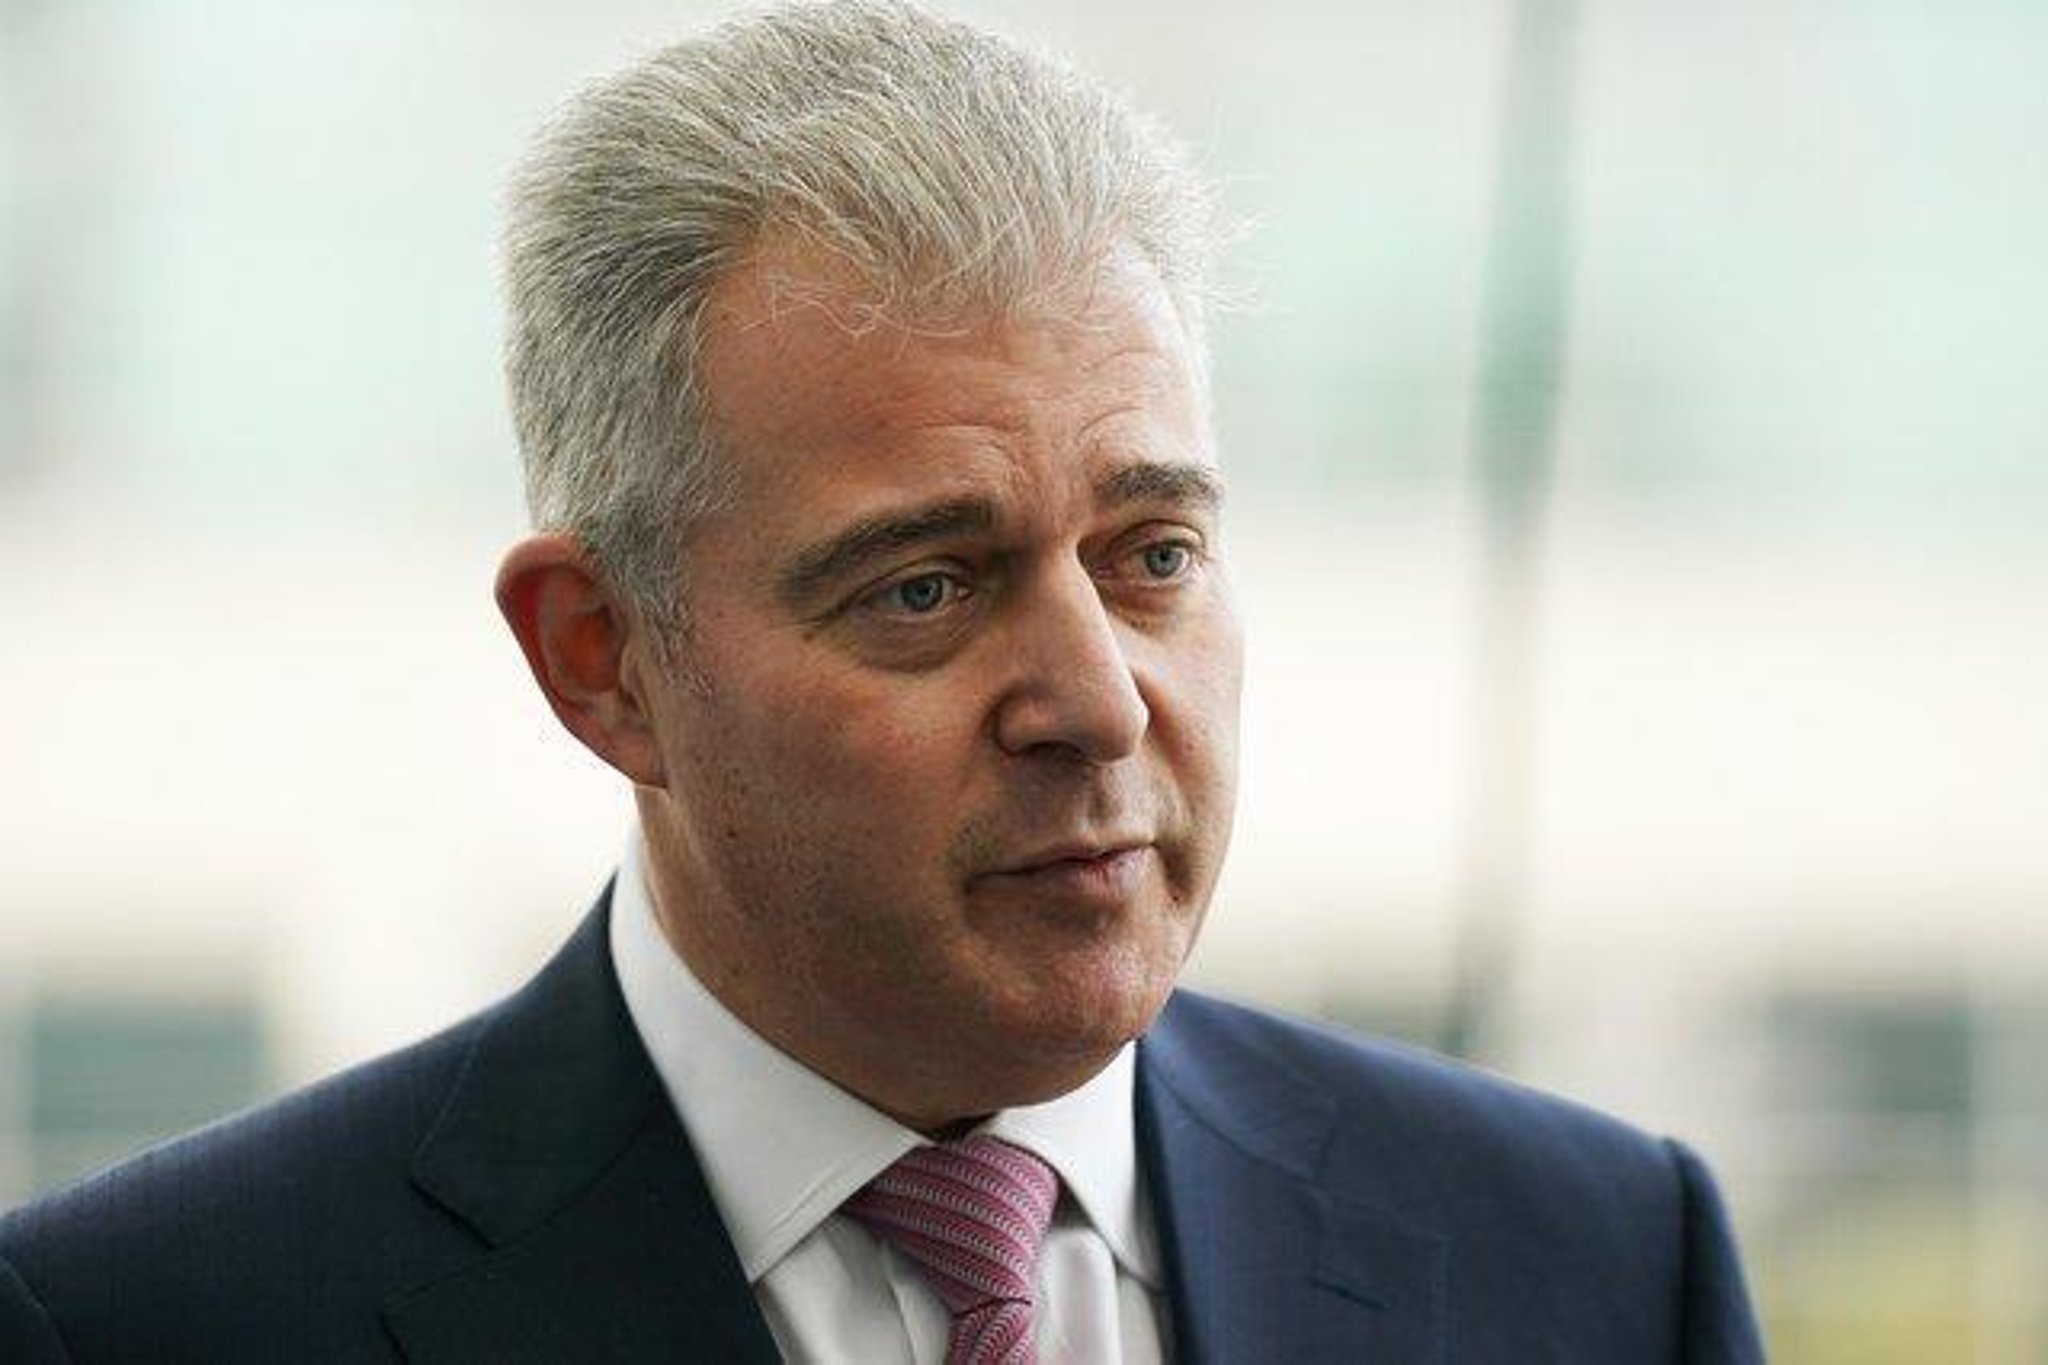 Secretary of State to meet with Stormont parties to press return to government